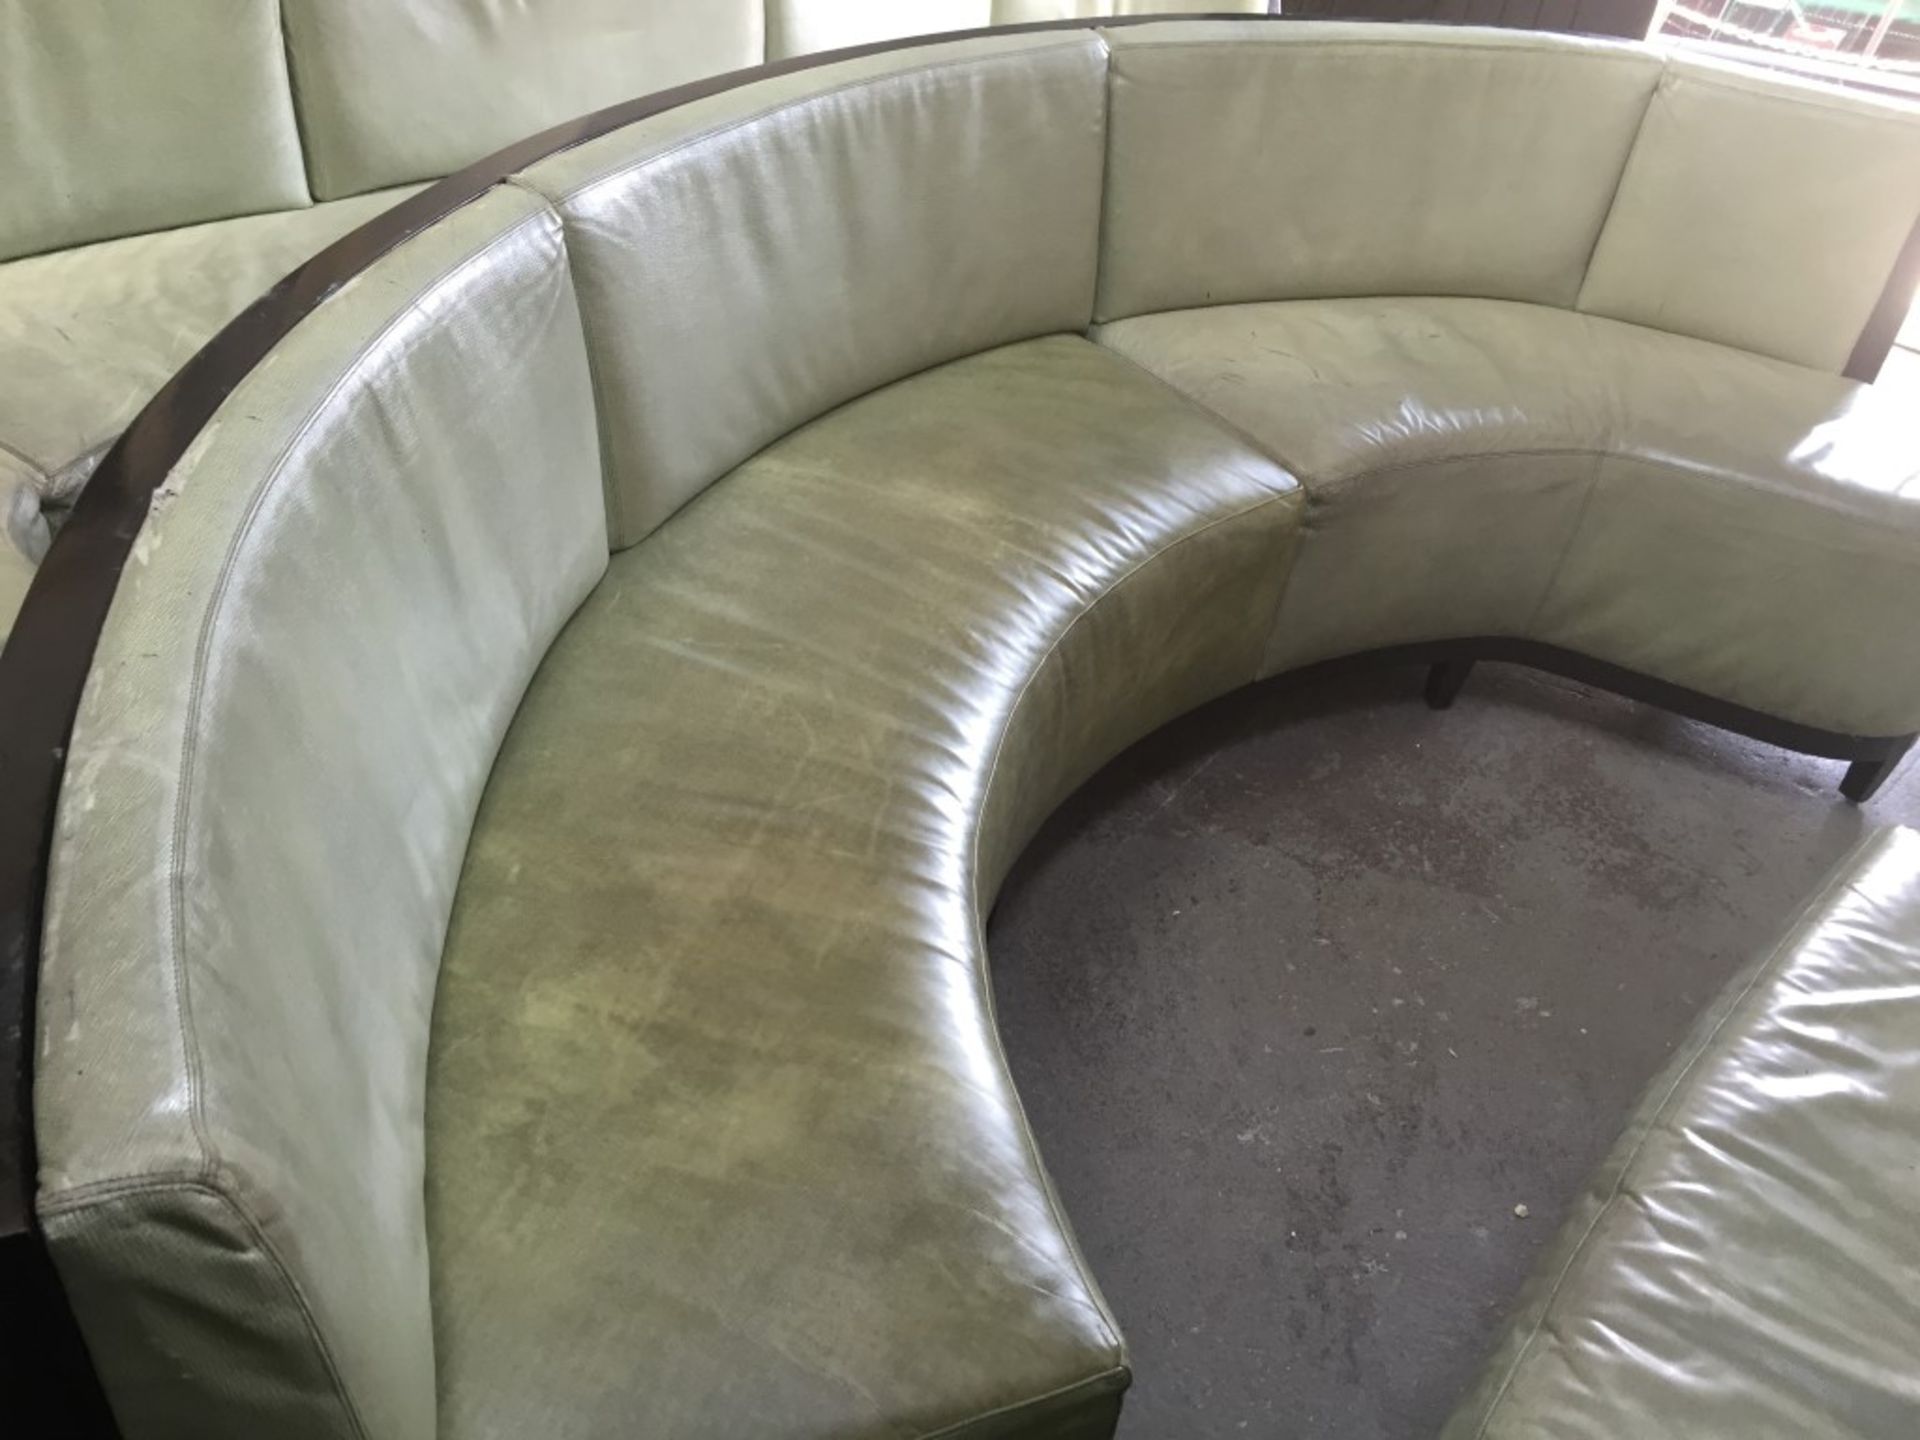 1 x Luxury Upholstered Curved Seating Area - Recently Removed From Nobu - Dimensions: W285 x D62cm x - Image 13 of 23